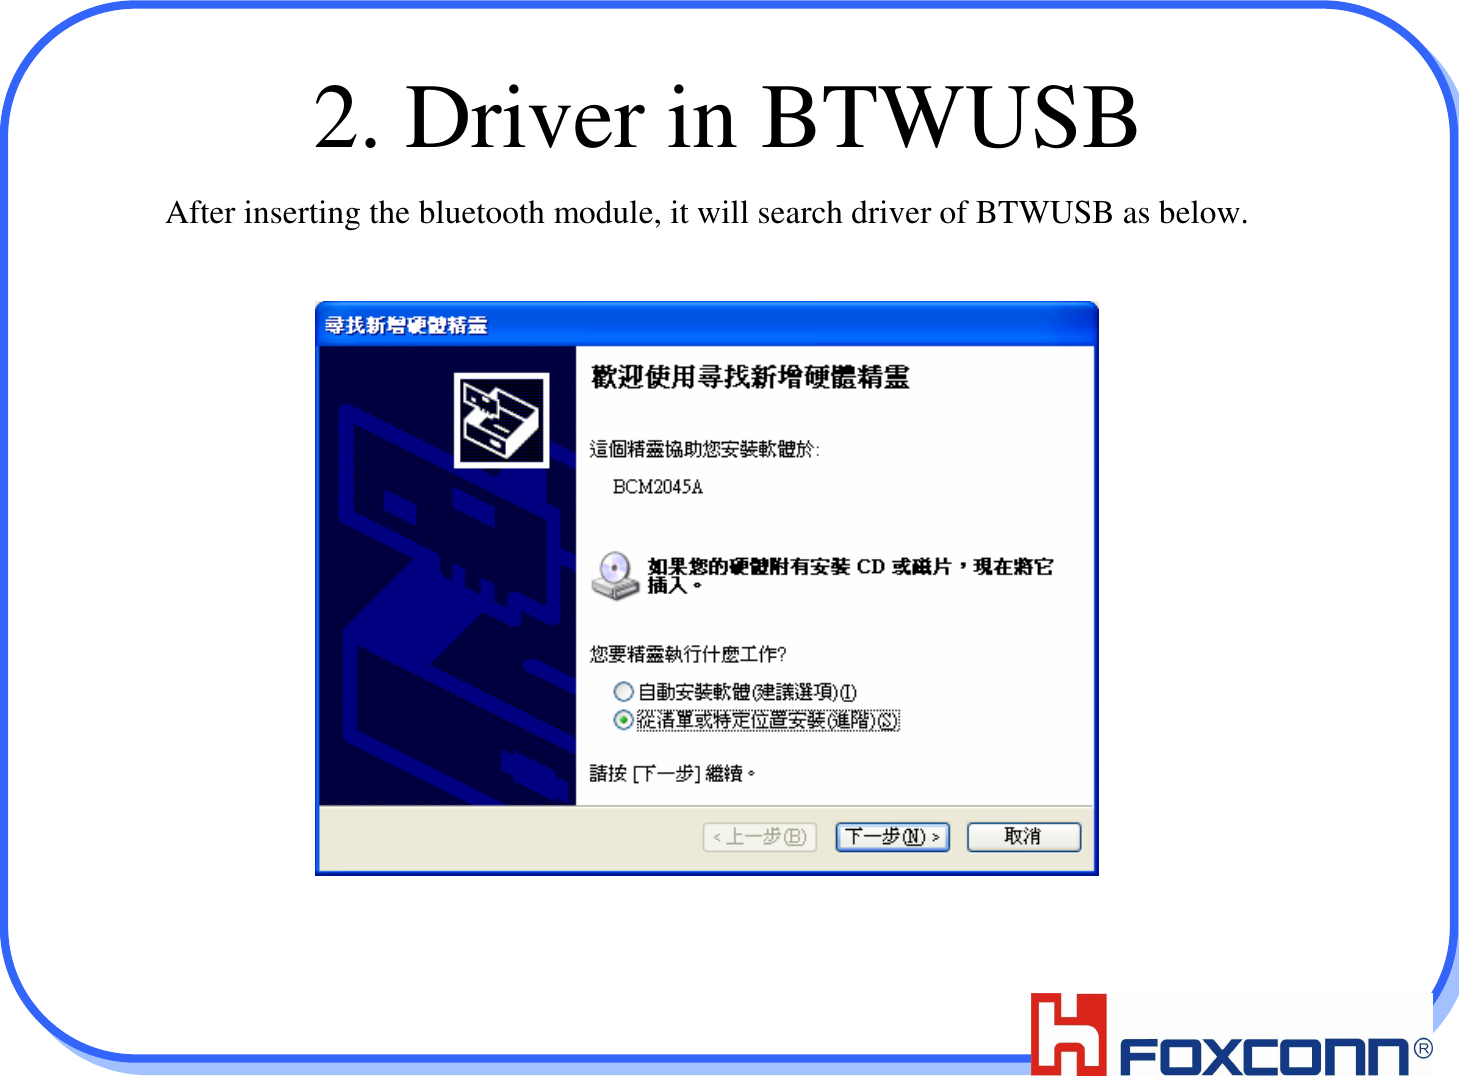 212. Driver in BTWUSBAfter inserting the bluetooth module, it will search driver of BTWUSB as below.